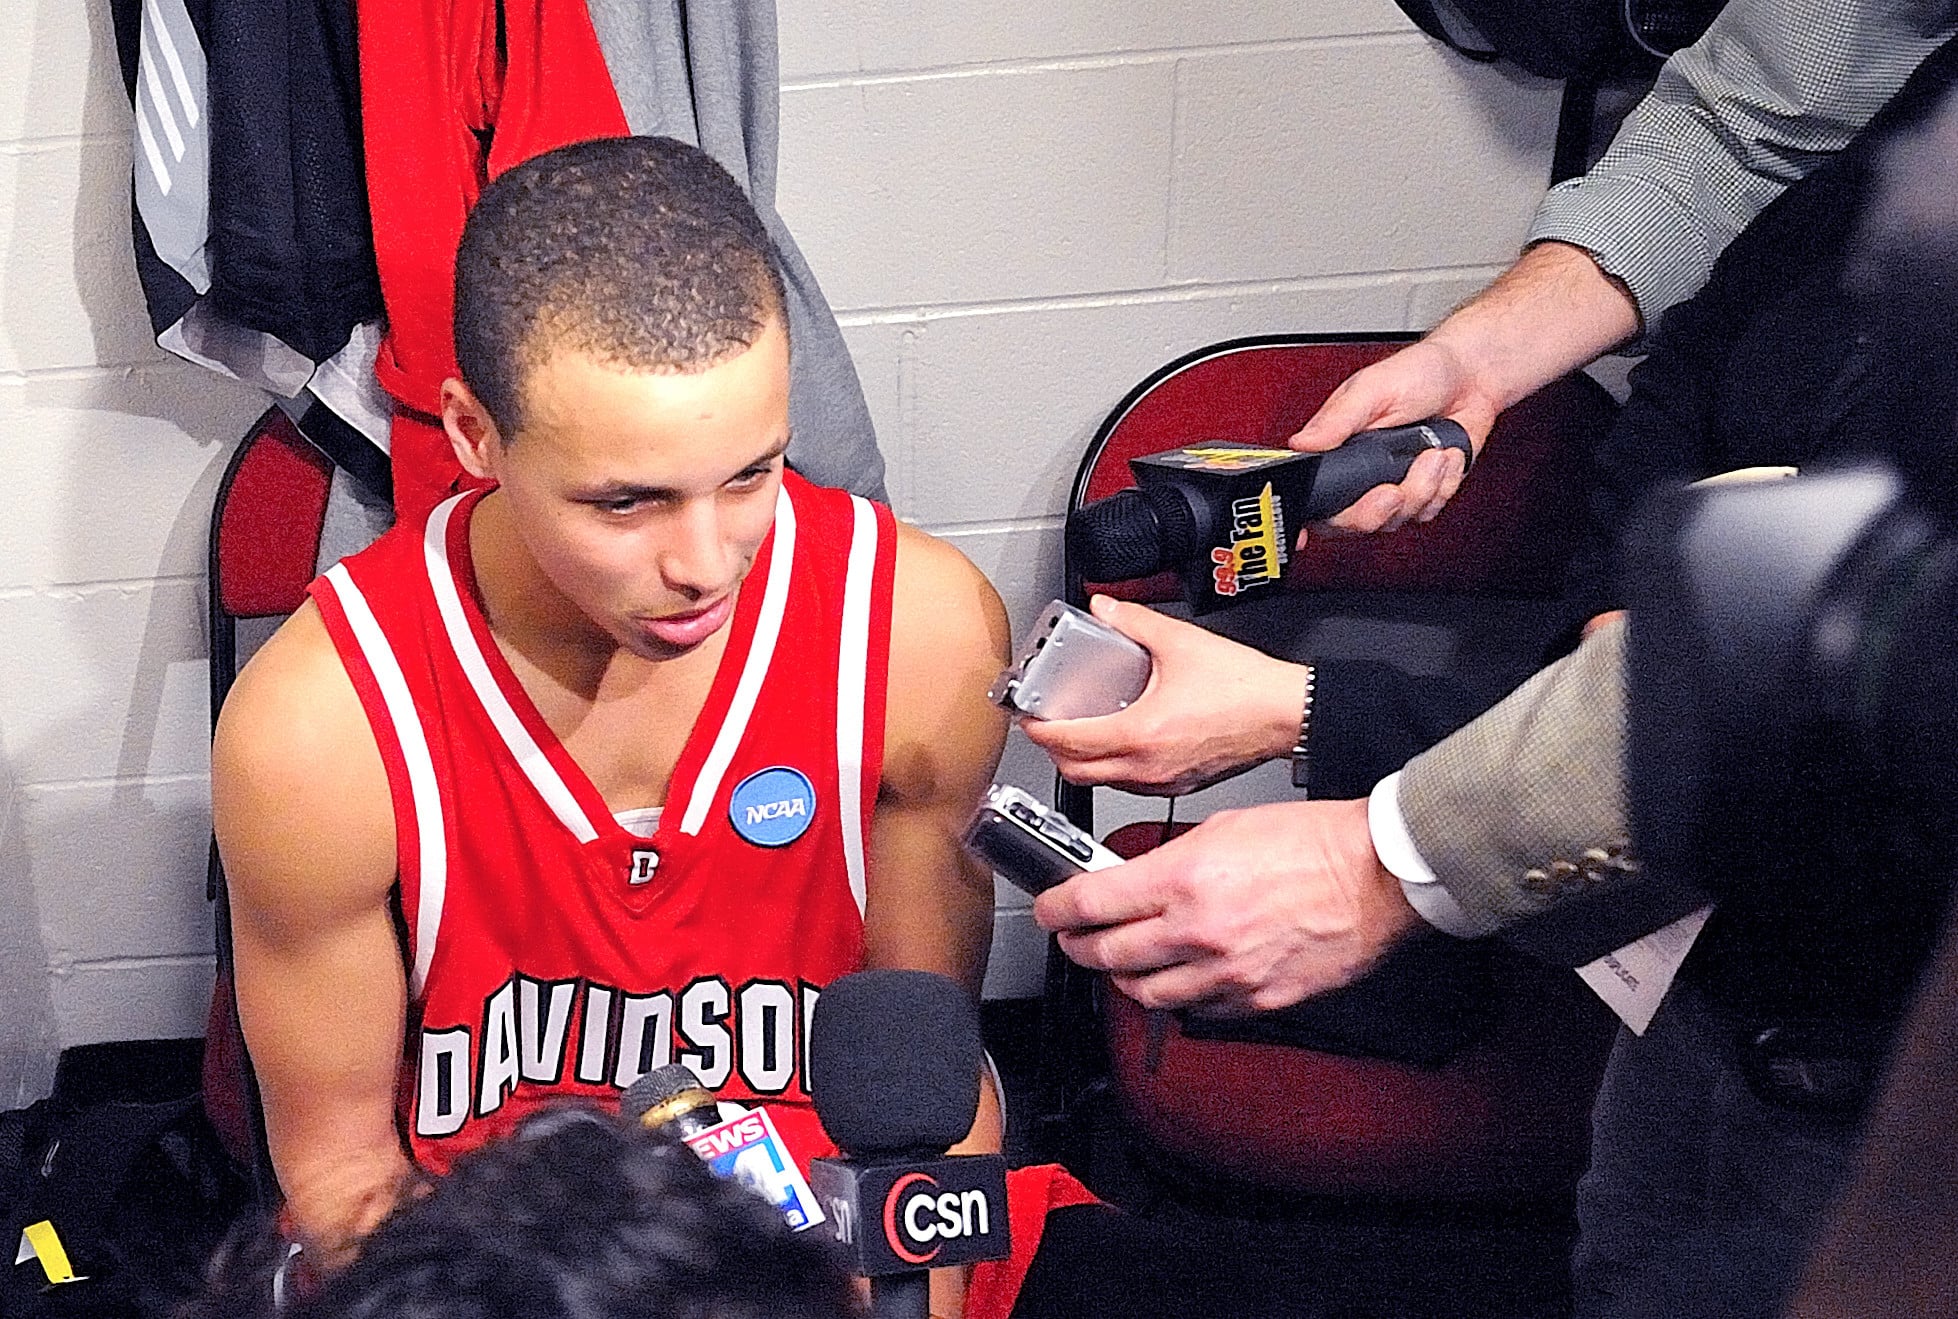 Stephen Curry, Davidson College Sophomore, is interviewed after the first round of the 2008 NCAA tournament against Gonzaga University.